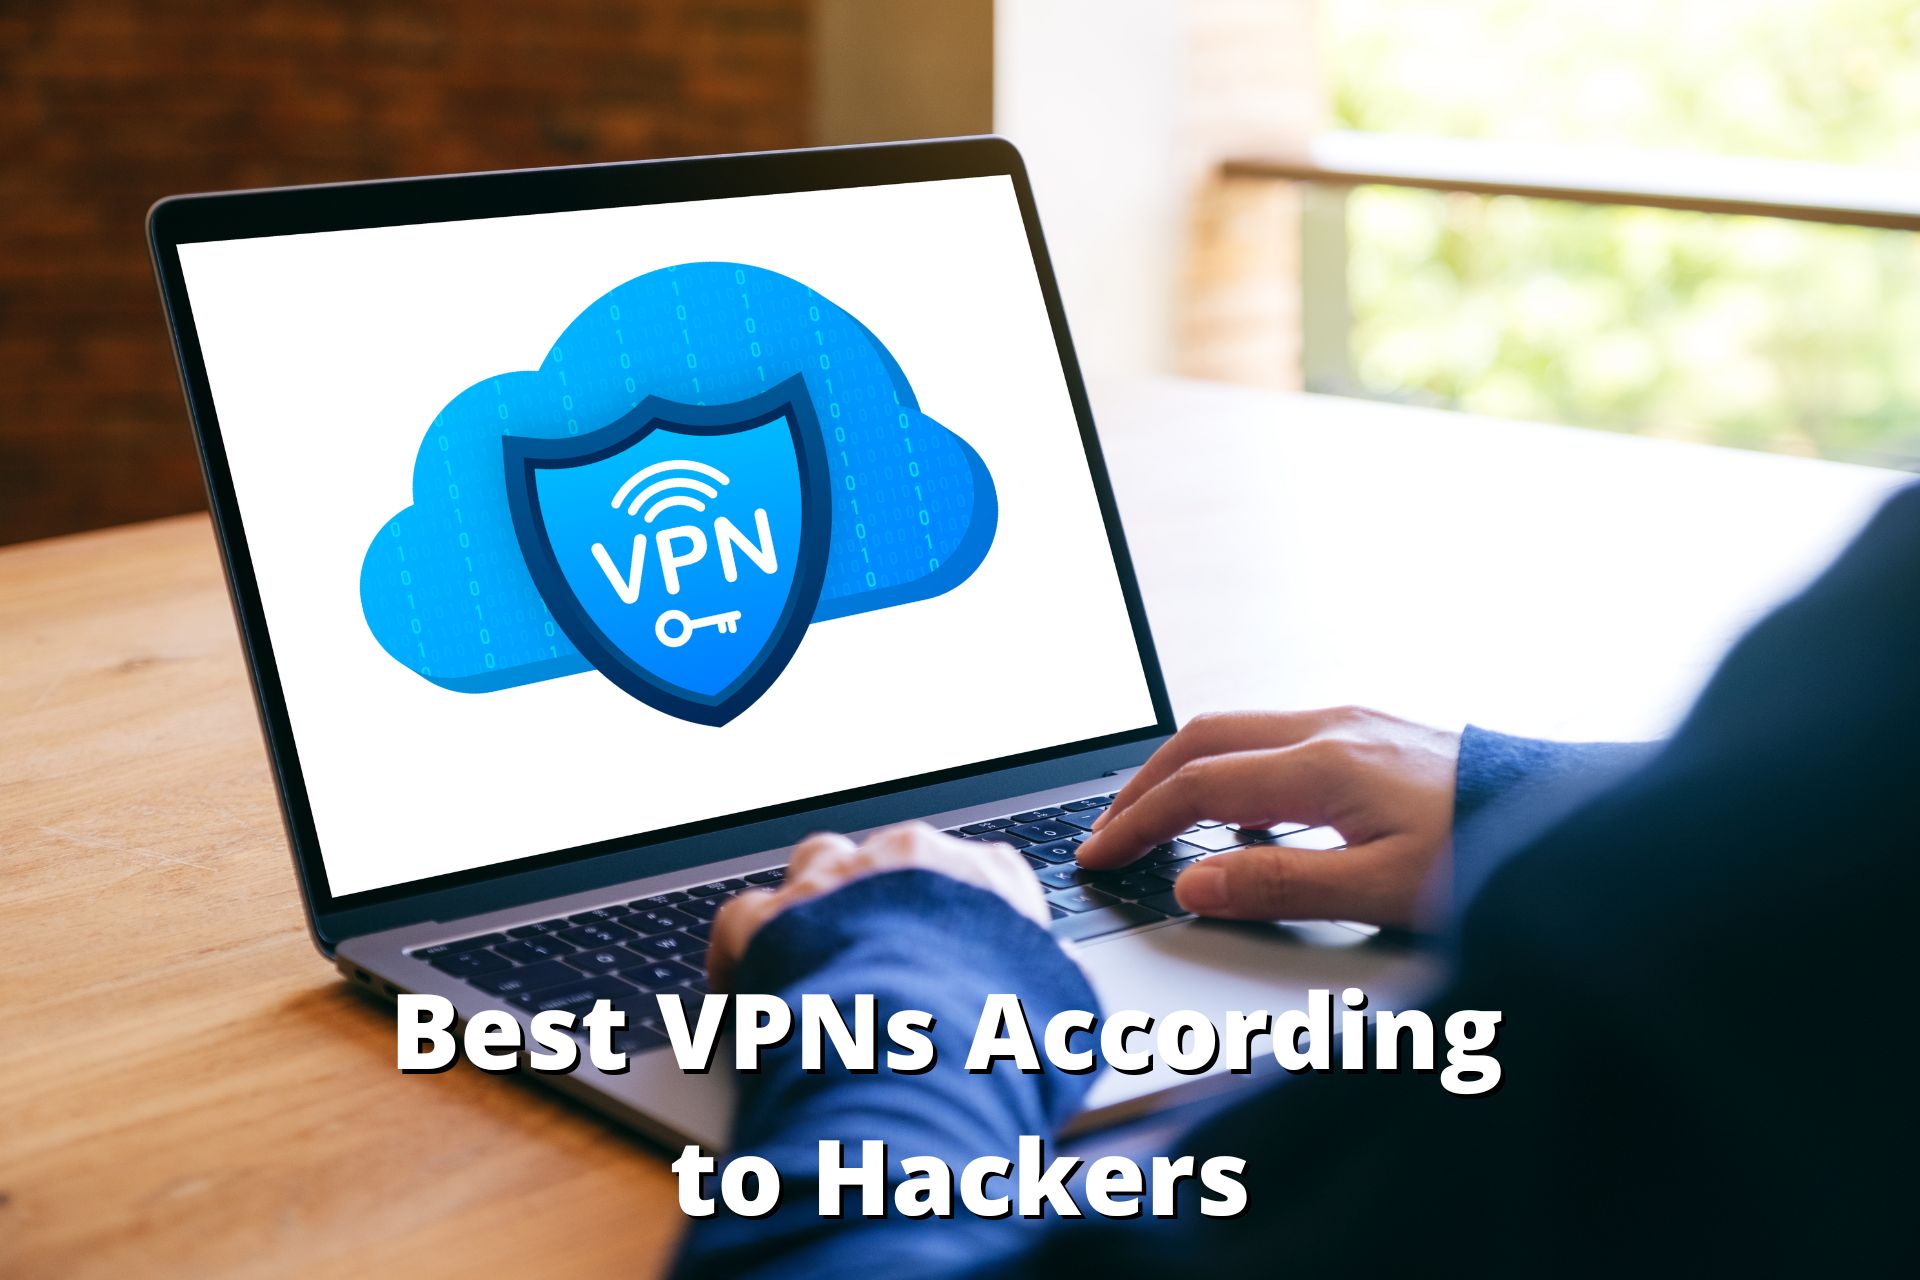 7 Best VPNs for Hackers: According to Real Hackers!